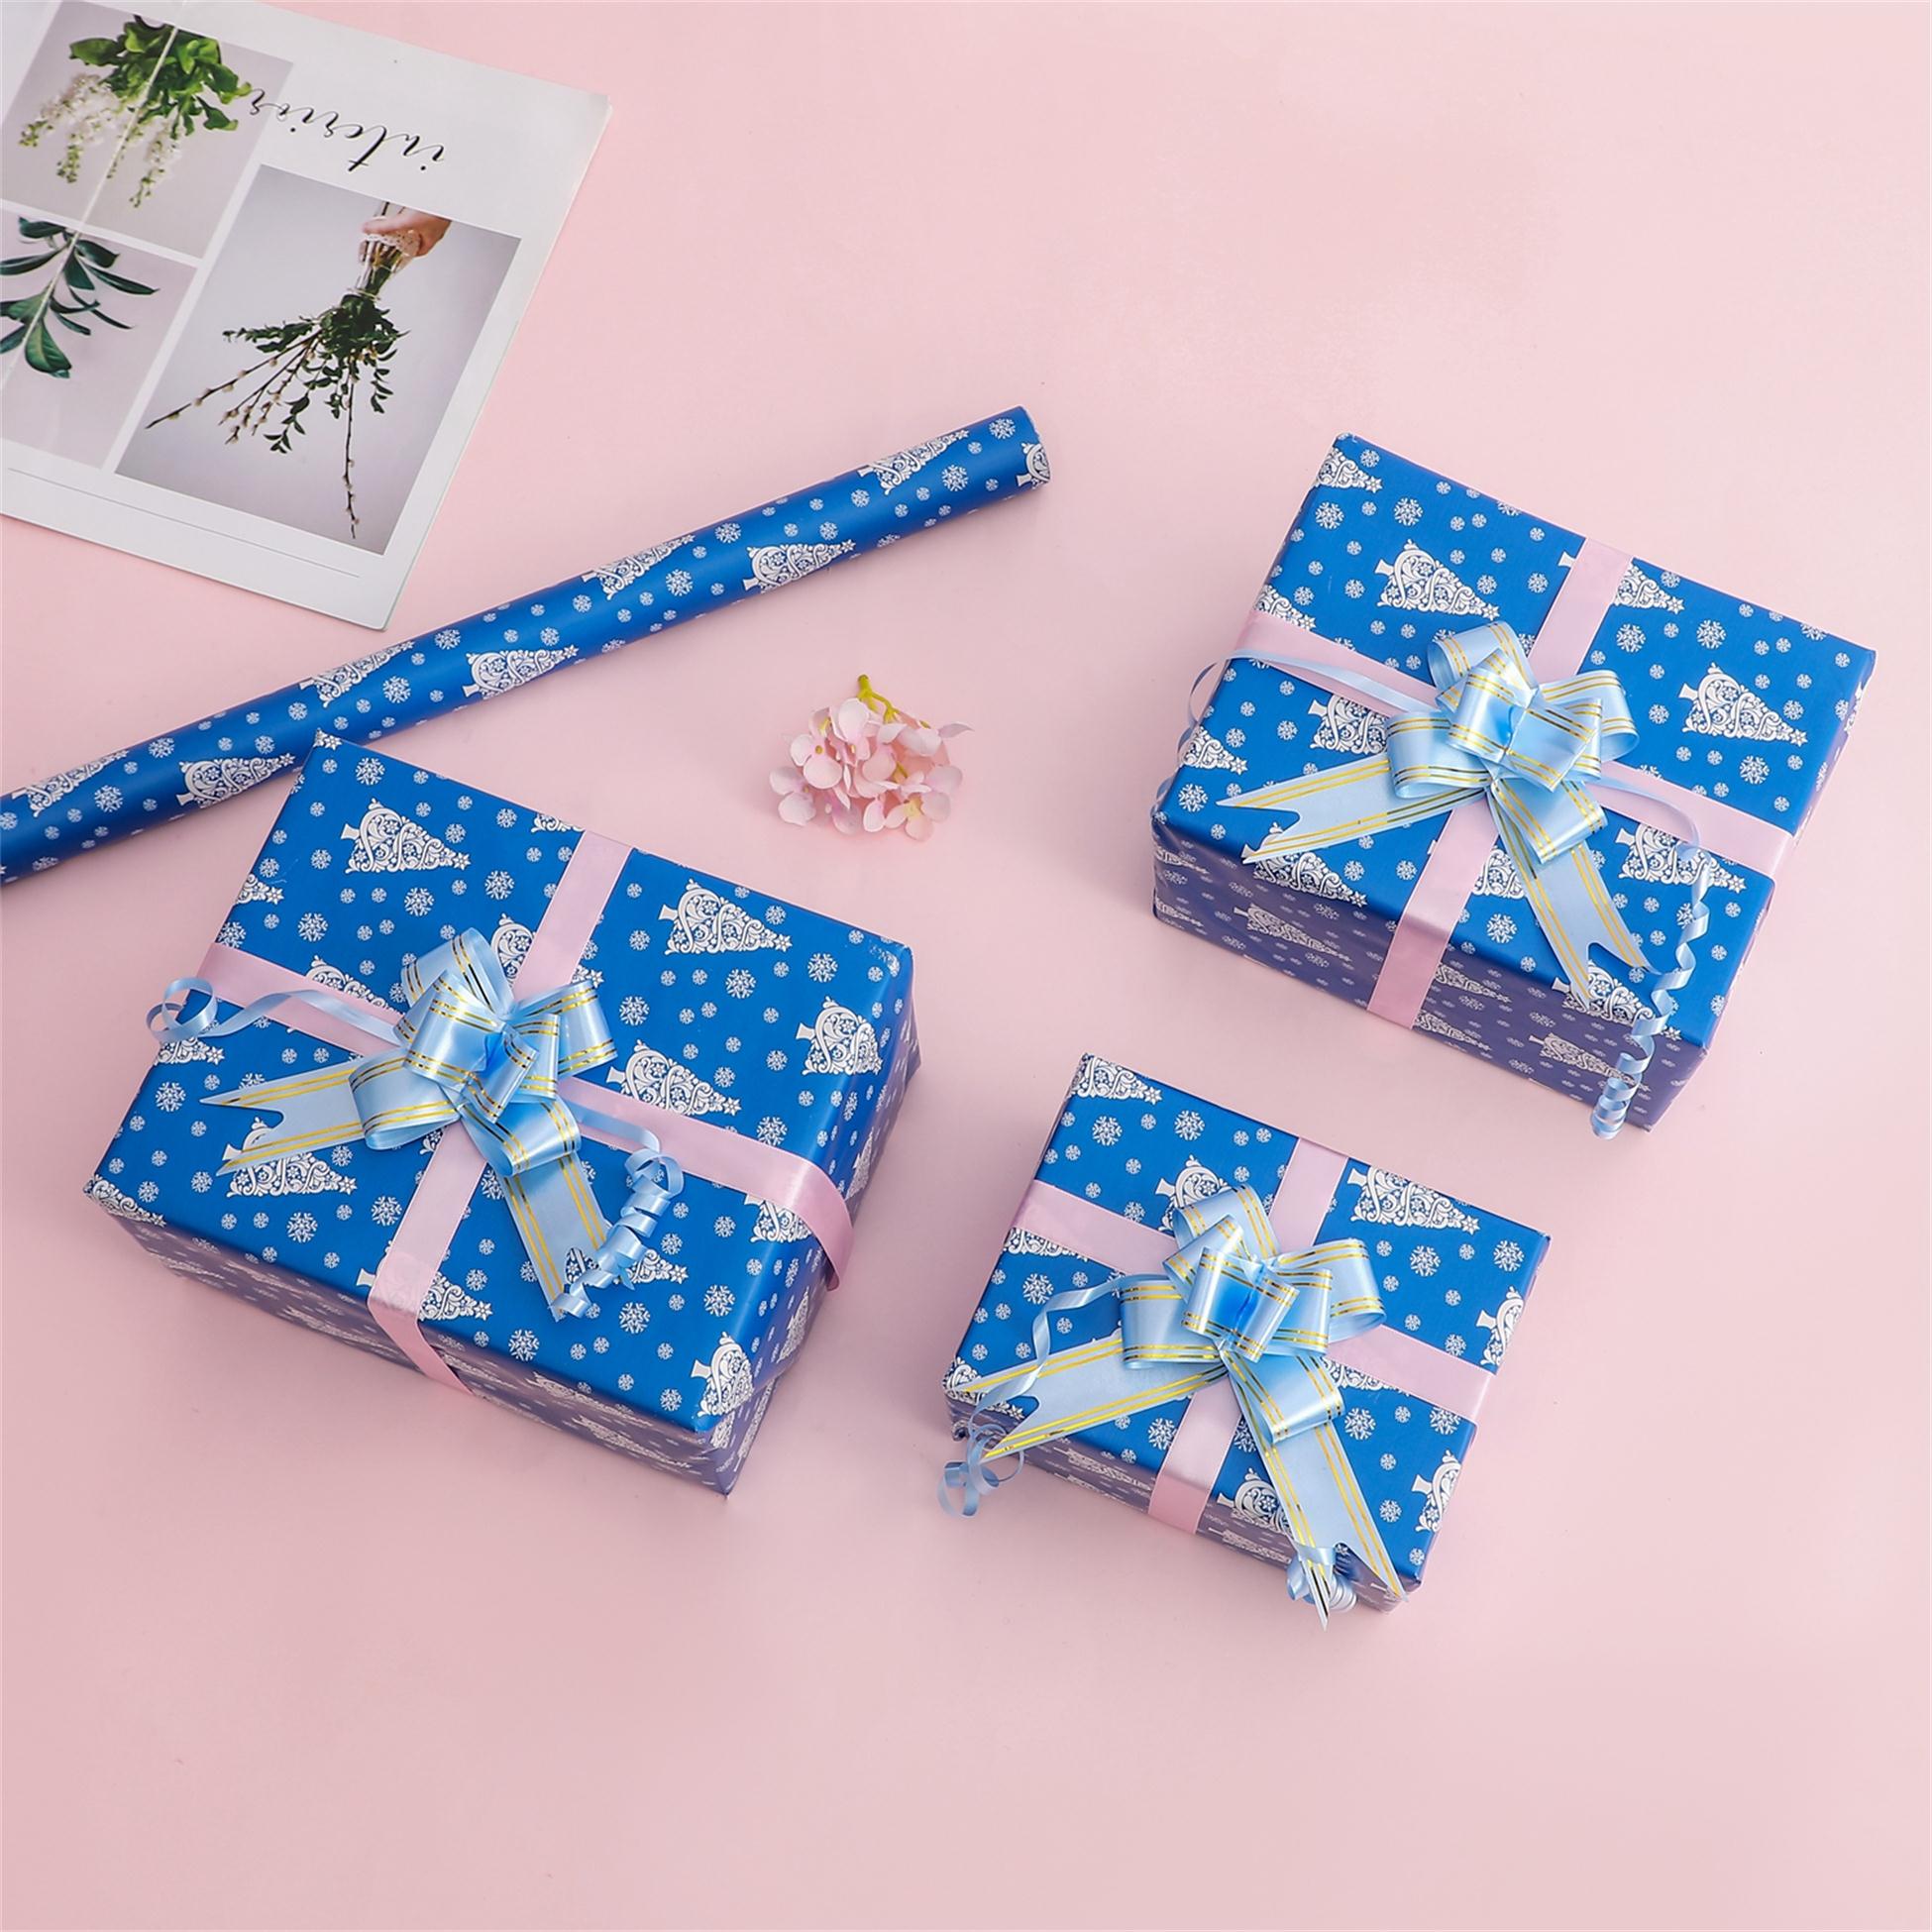 Top wholesale wrapping paper company for birthday gifts-1